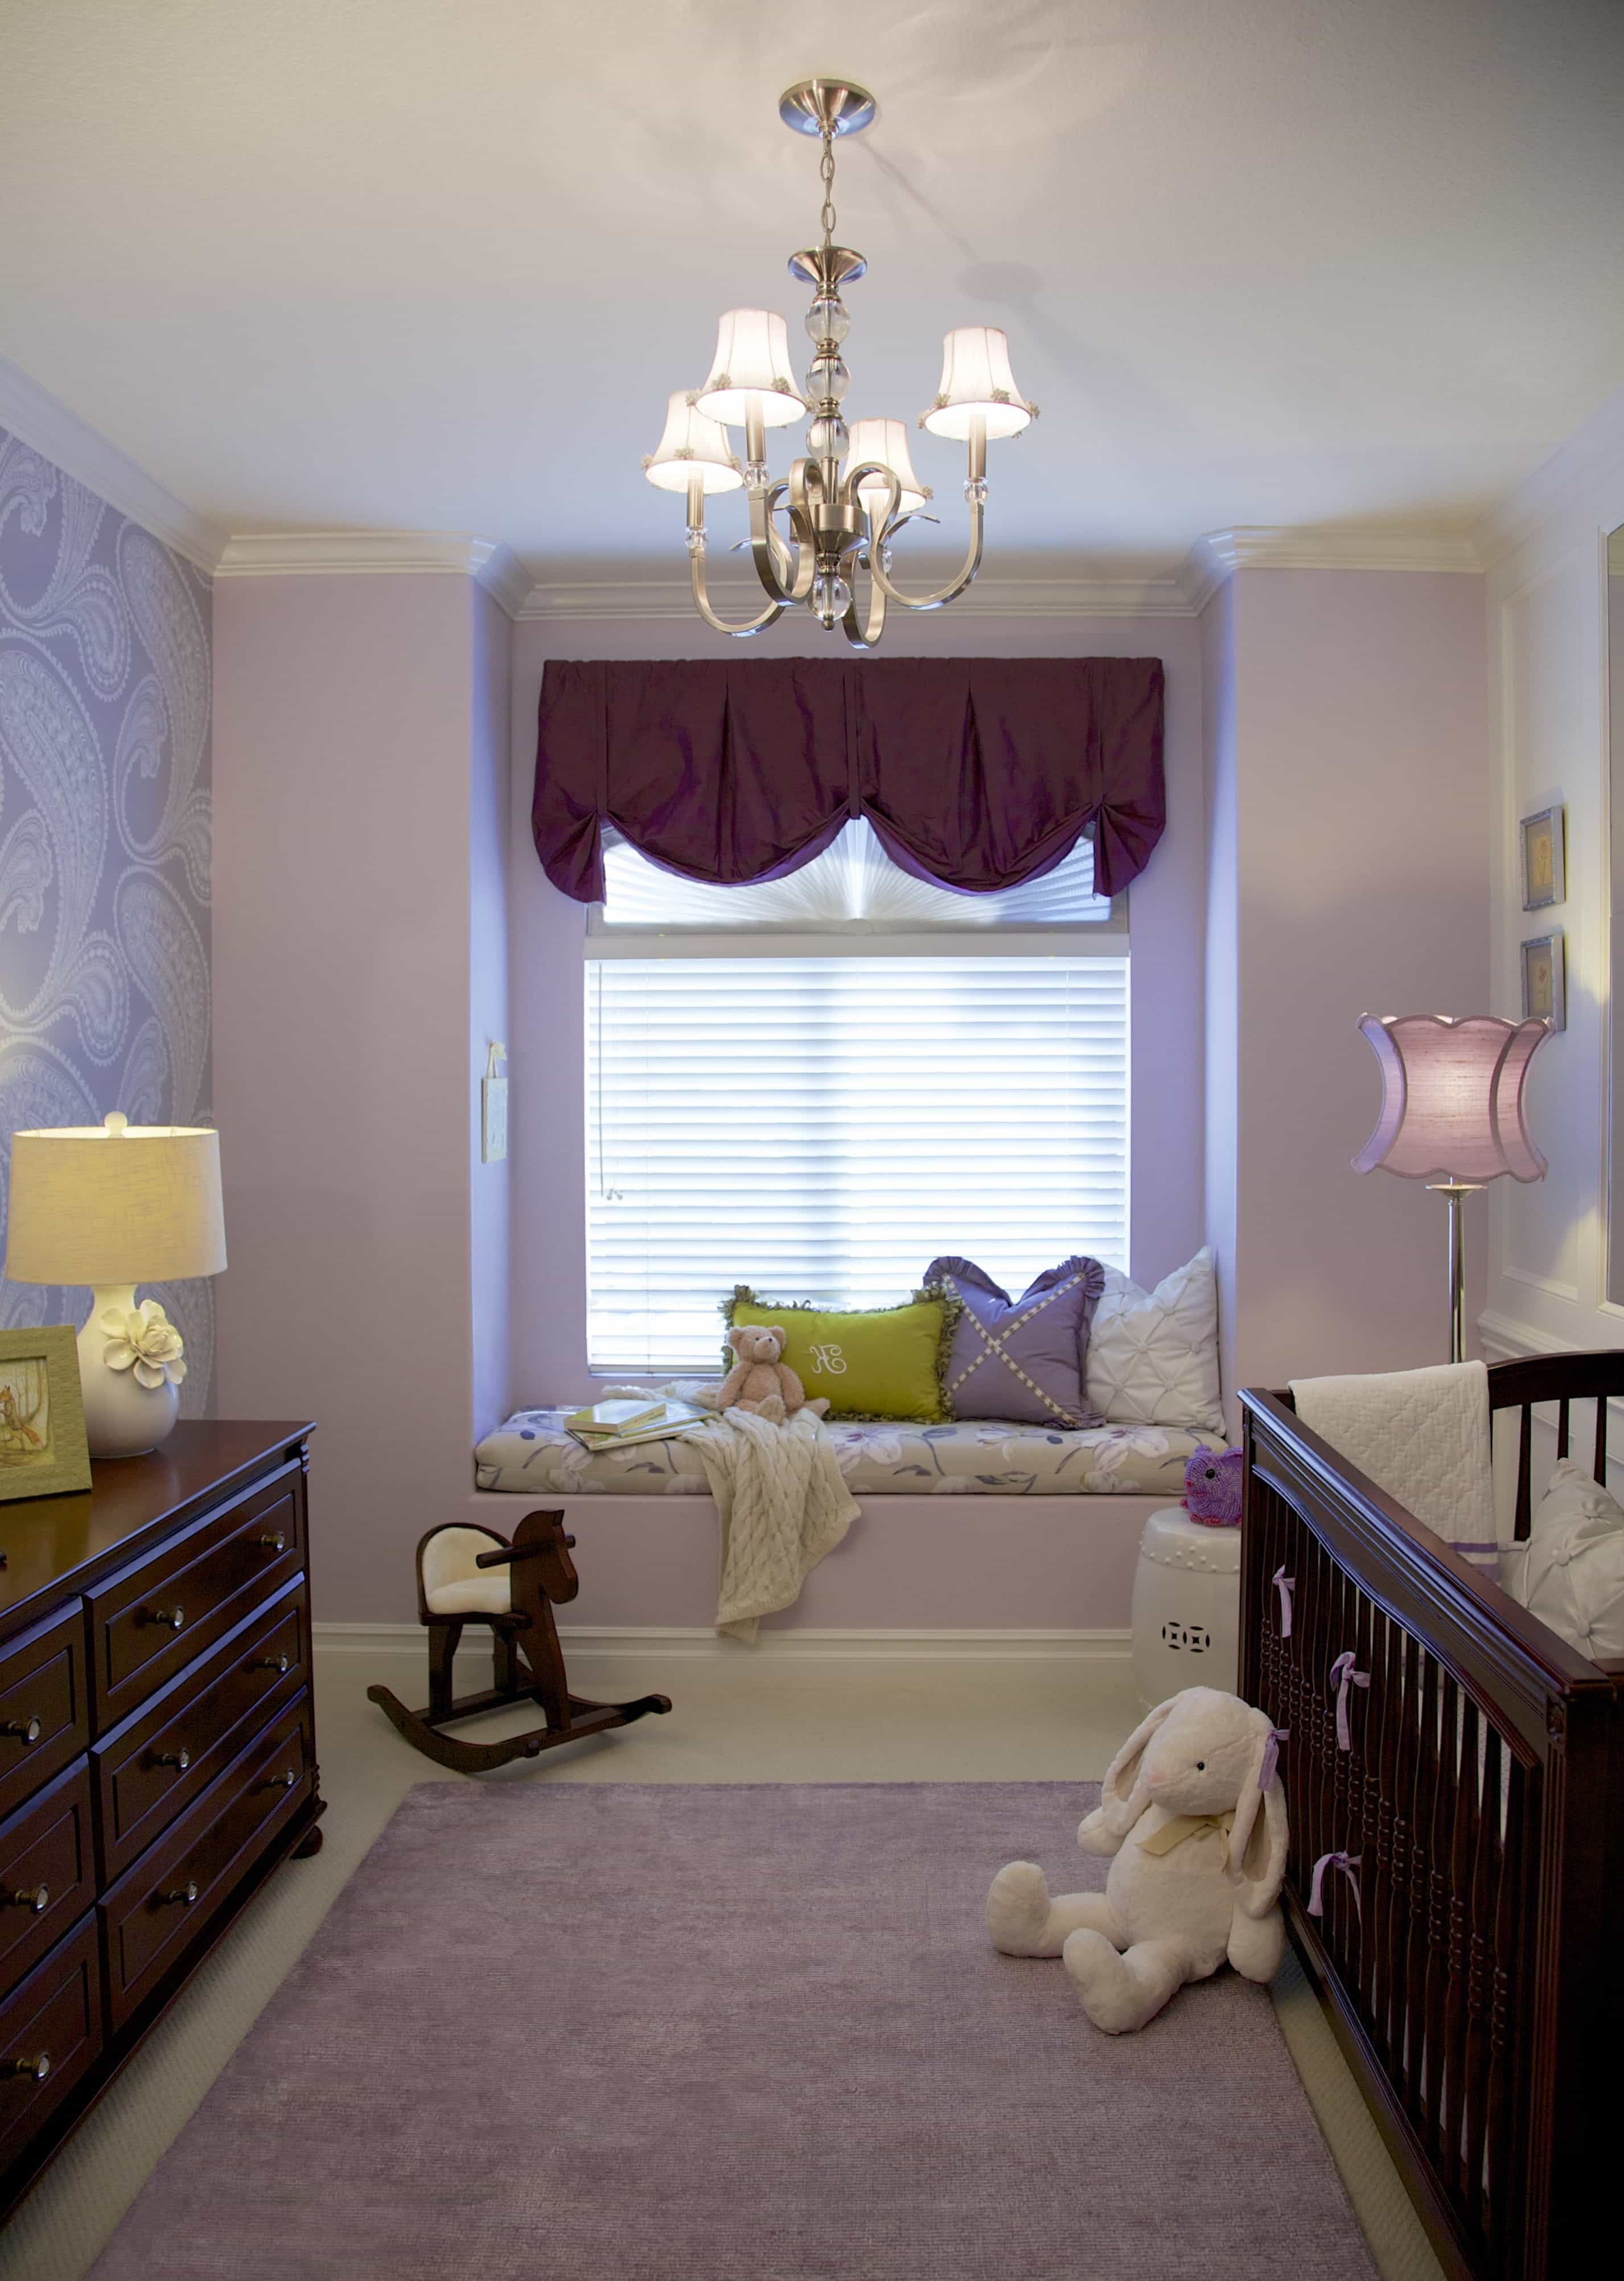 Nursery Decoration Sweet Sophisticated Interior (View 4 of 33)